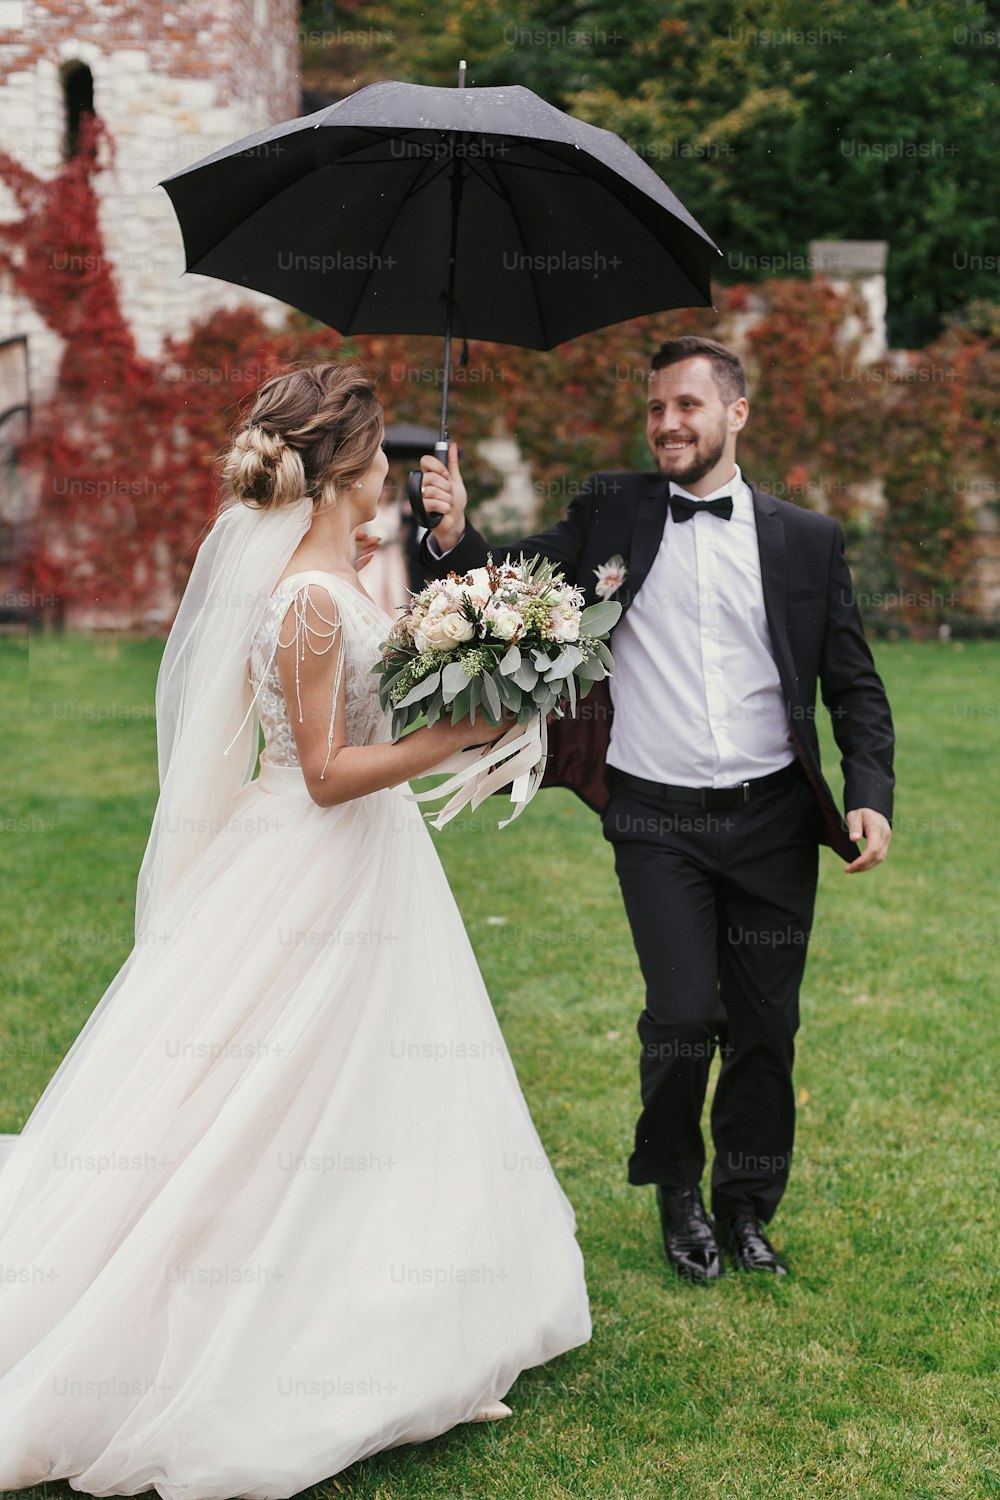 Stylish groom running under umbrella in rainy outdoor to Gorgeous bride and smiling. Sensual wedding couple having fun in rain. Romantic moments of newlyweds.